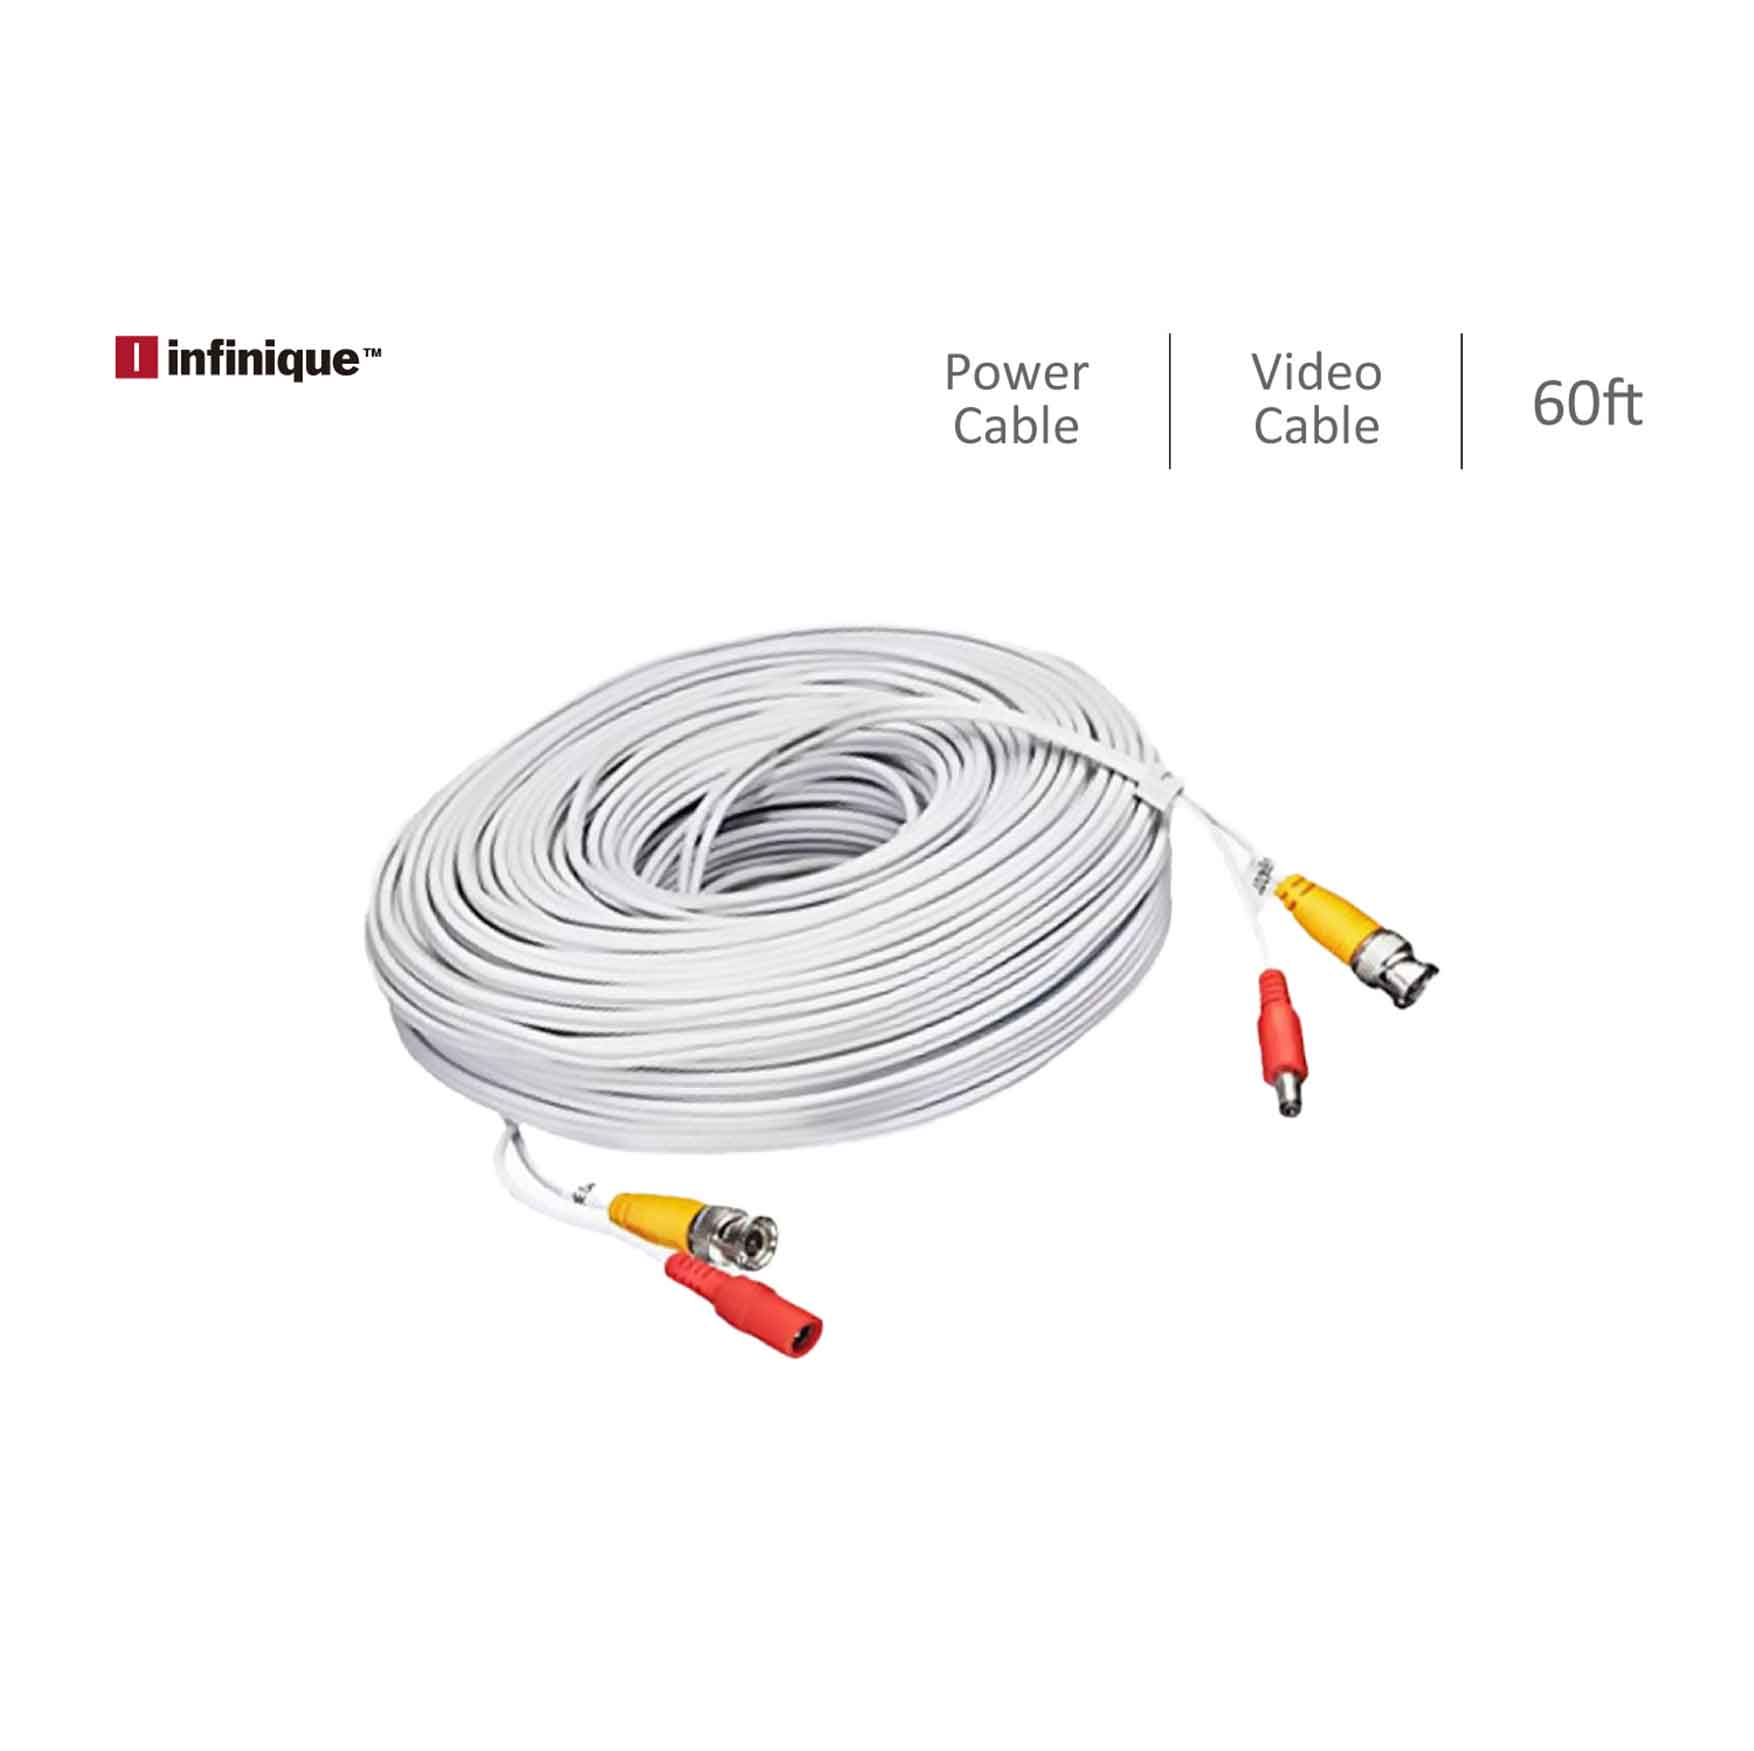 Infinique Video and Power Cable 60ft